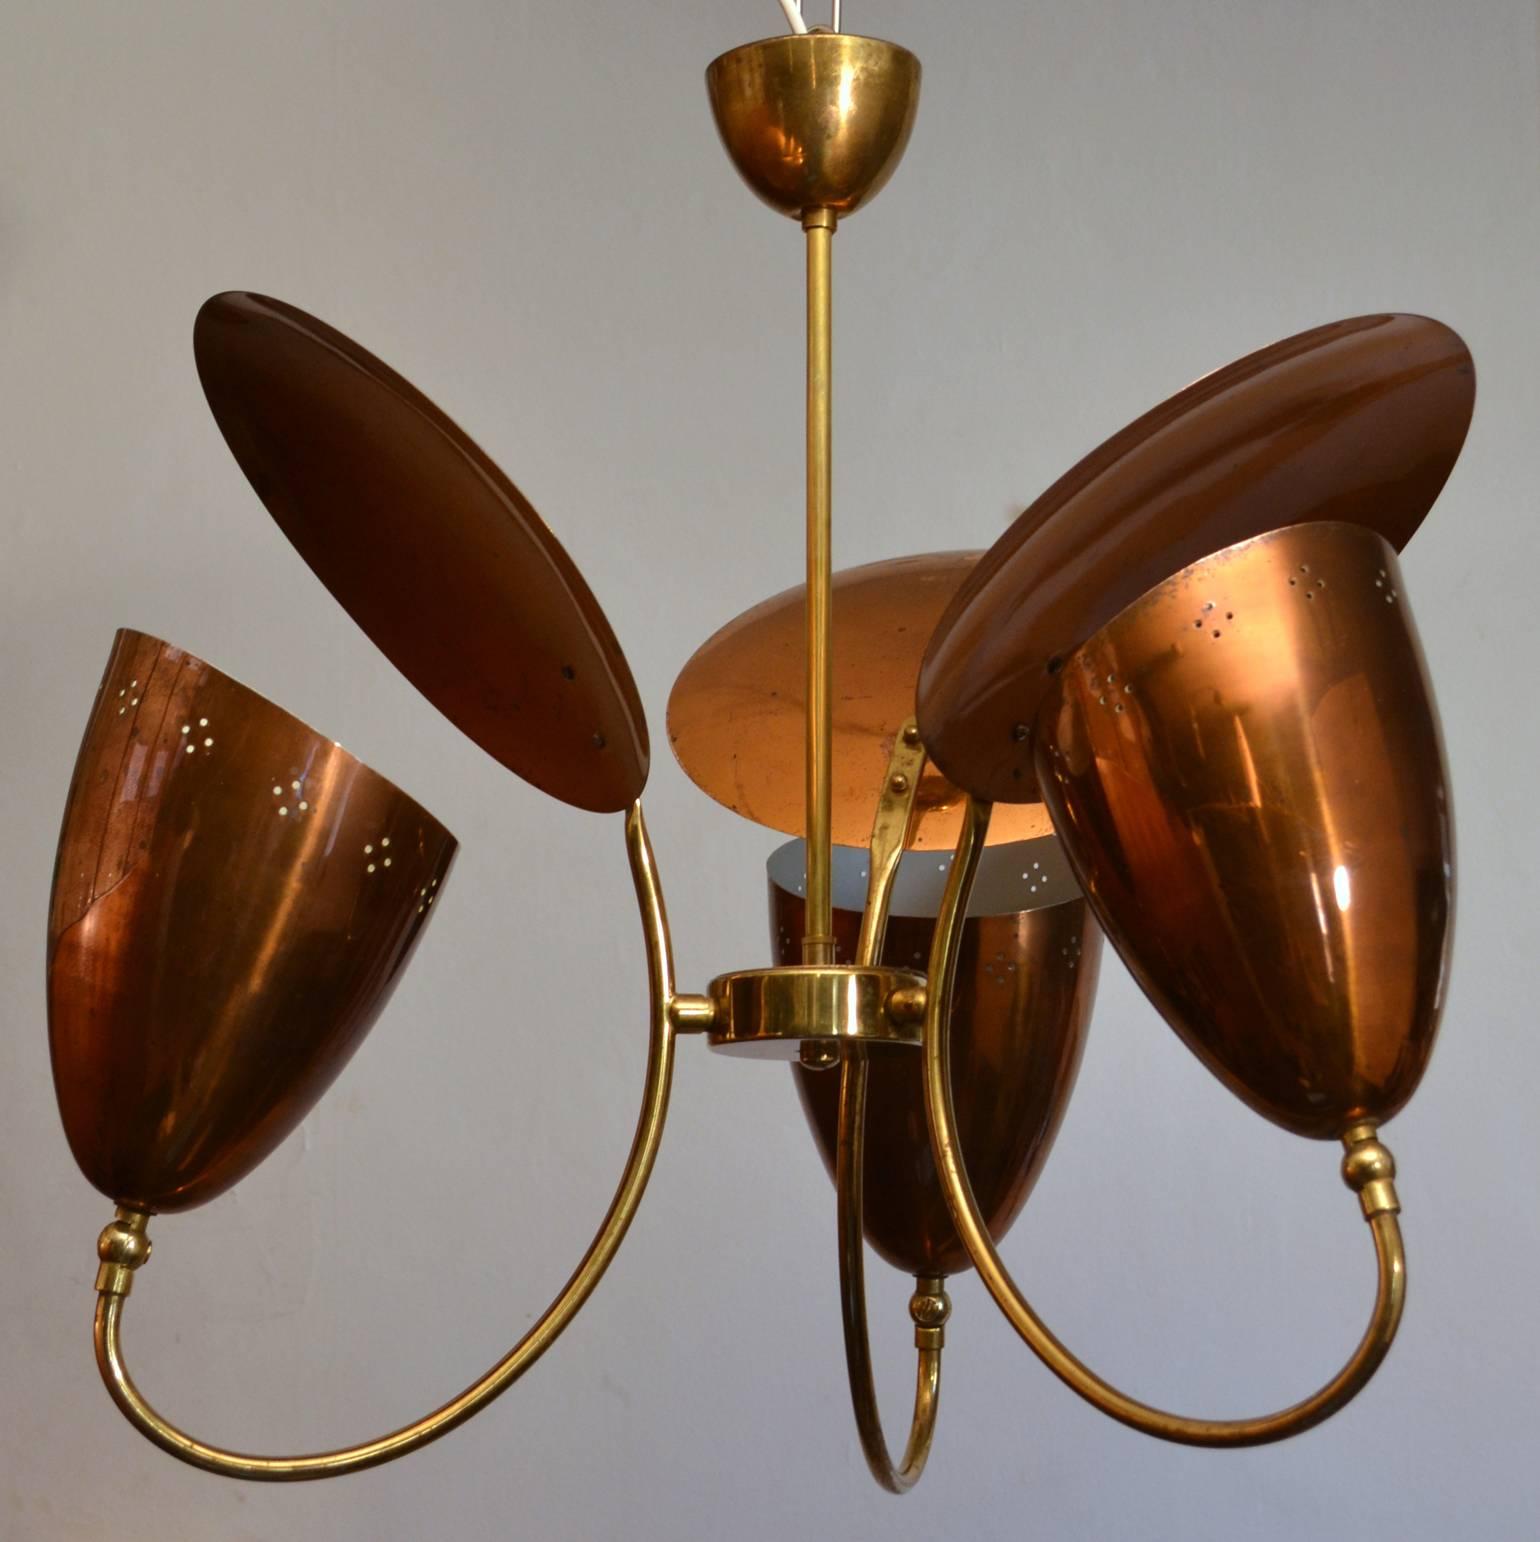 Scandinavian 1950s Three-Arm with Reflector Chandelier in Perforated Copper and Brass